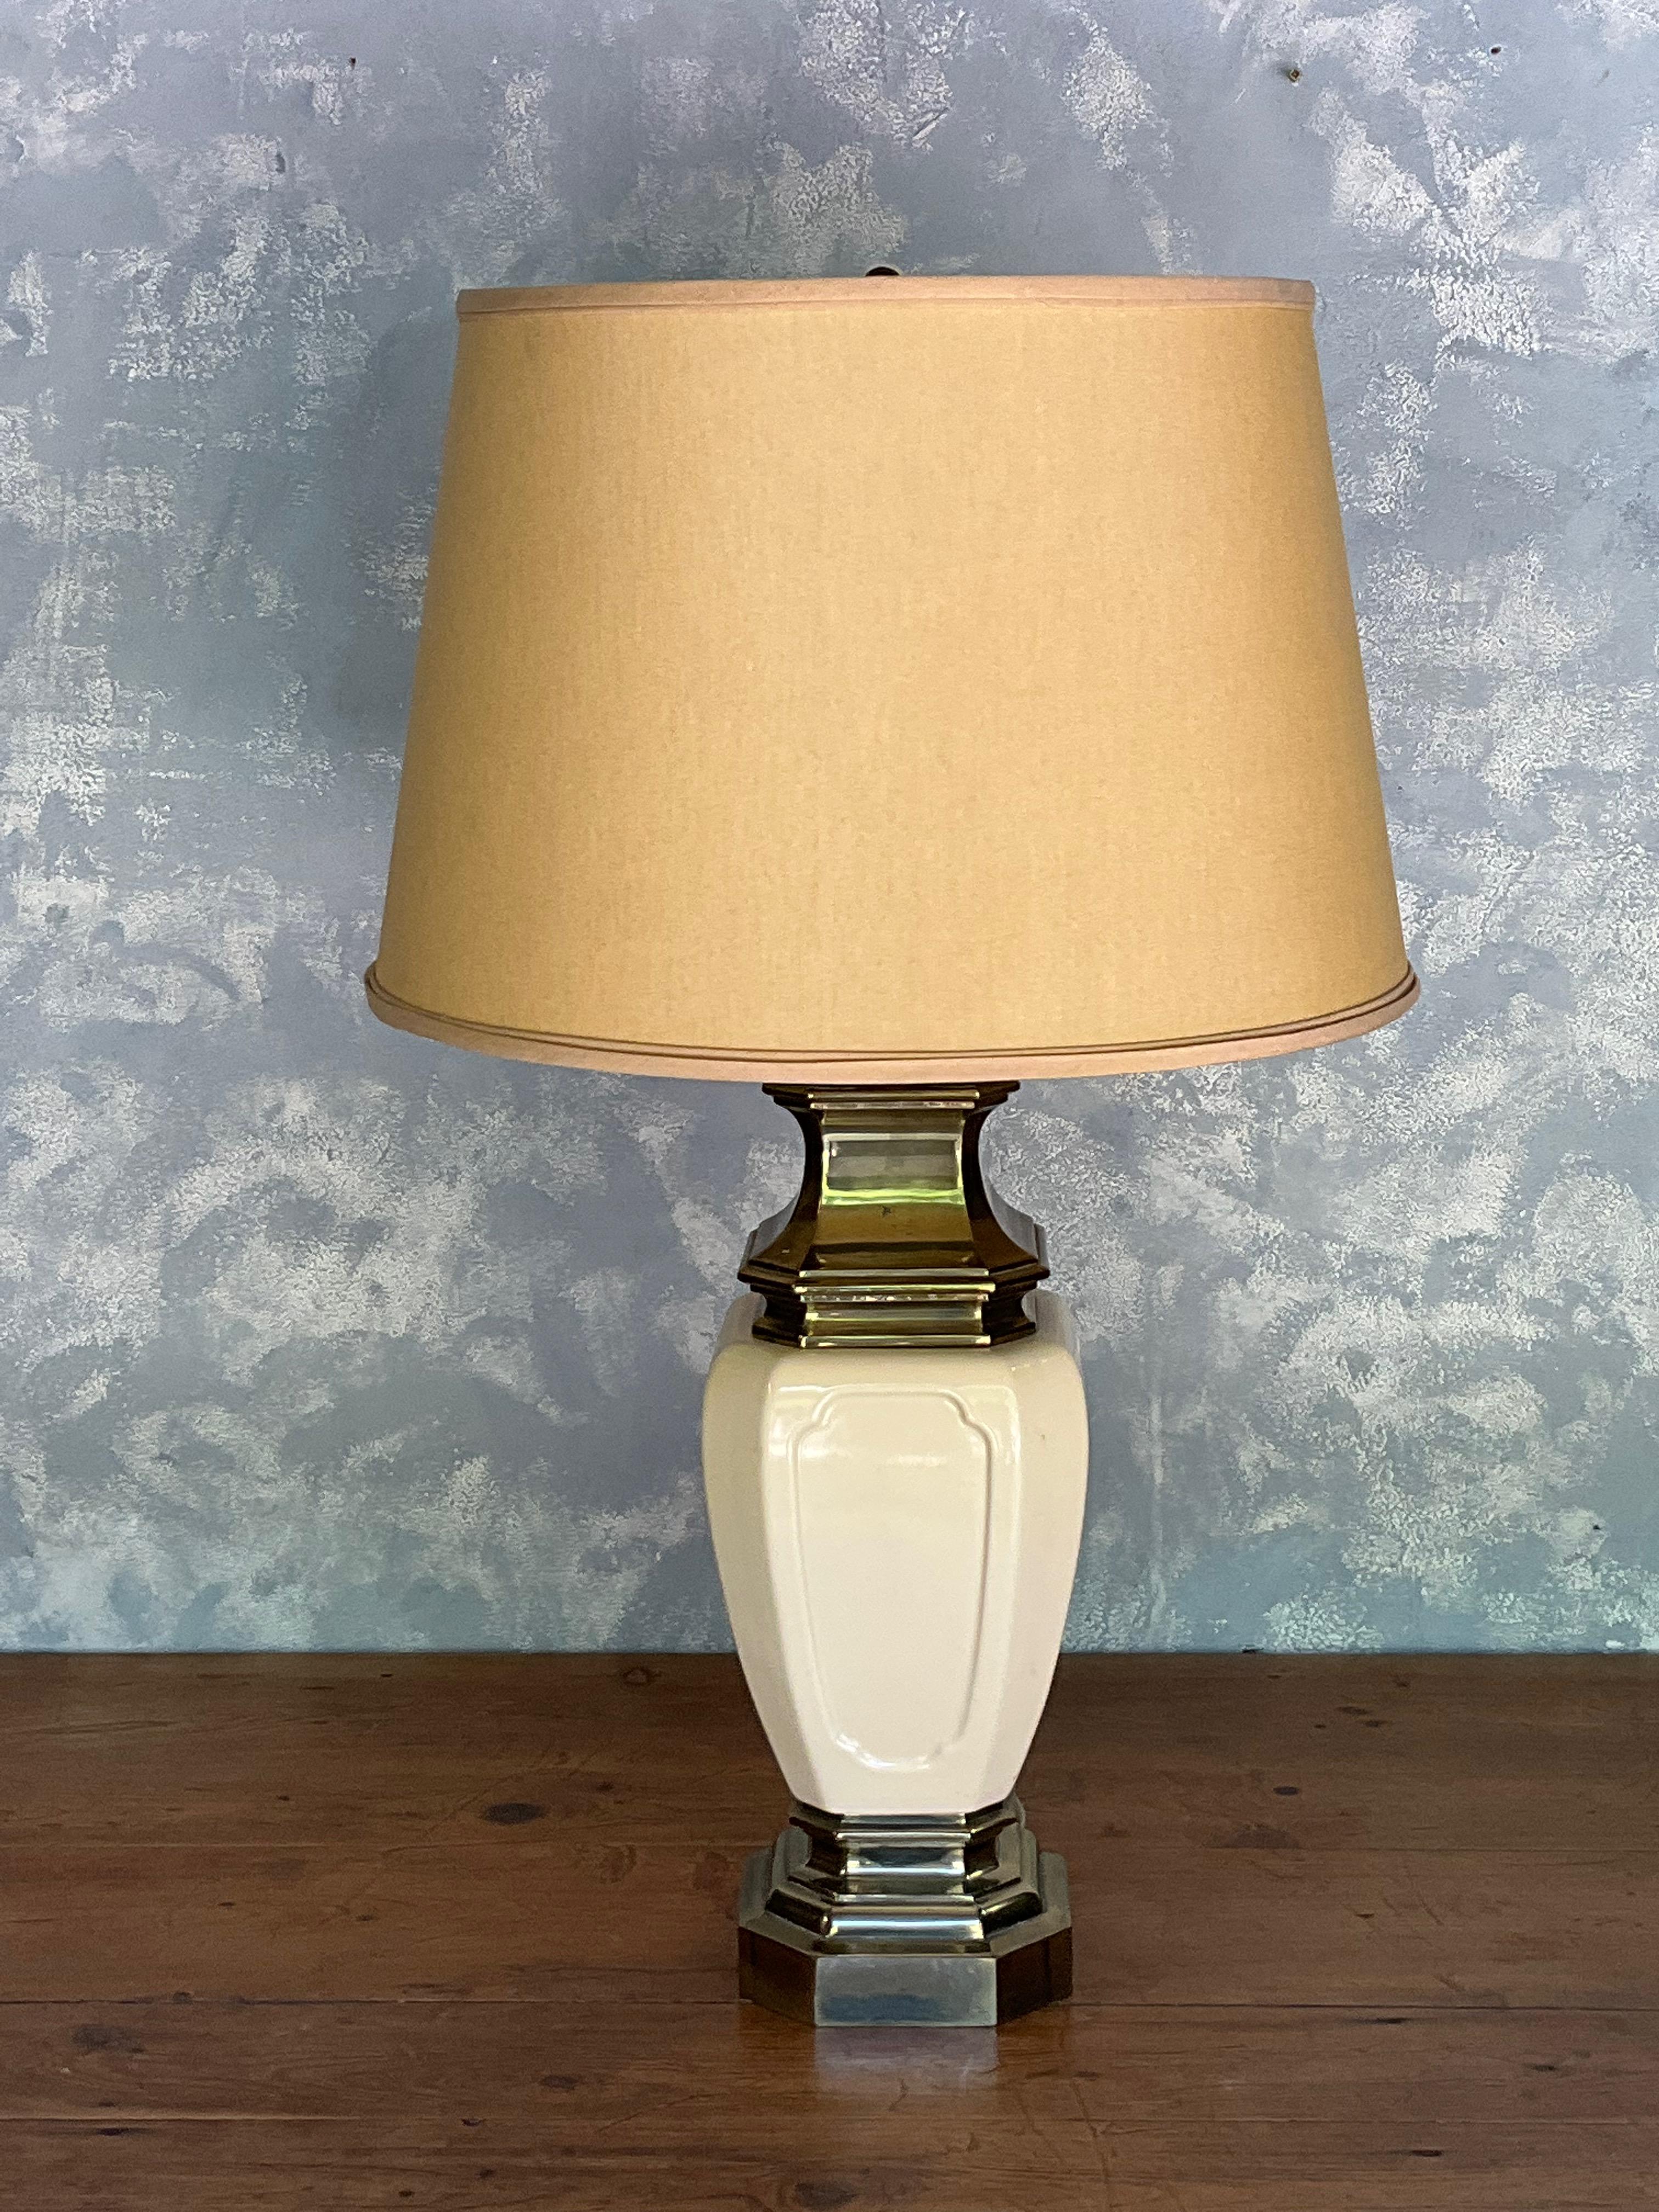 Presenting an American 1950s Stiffel cream colored ceramic lamp, elegantly mounted on a handsome stepped brass base. This lamp has recently been rewired to ensure optimal functionality. Please note that a shade is not included. The dimensions of